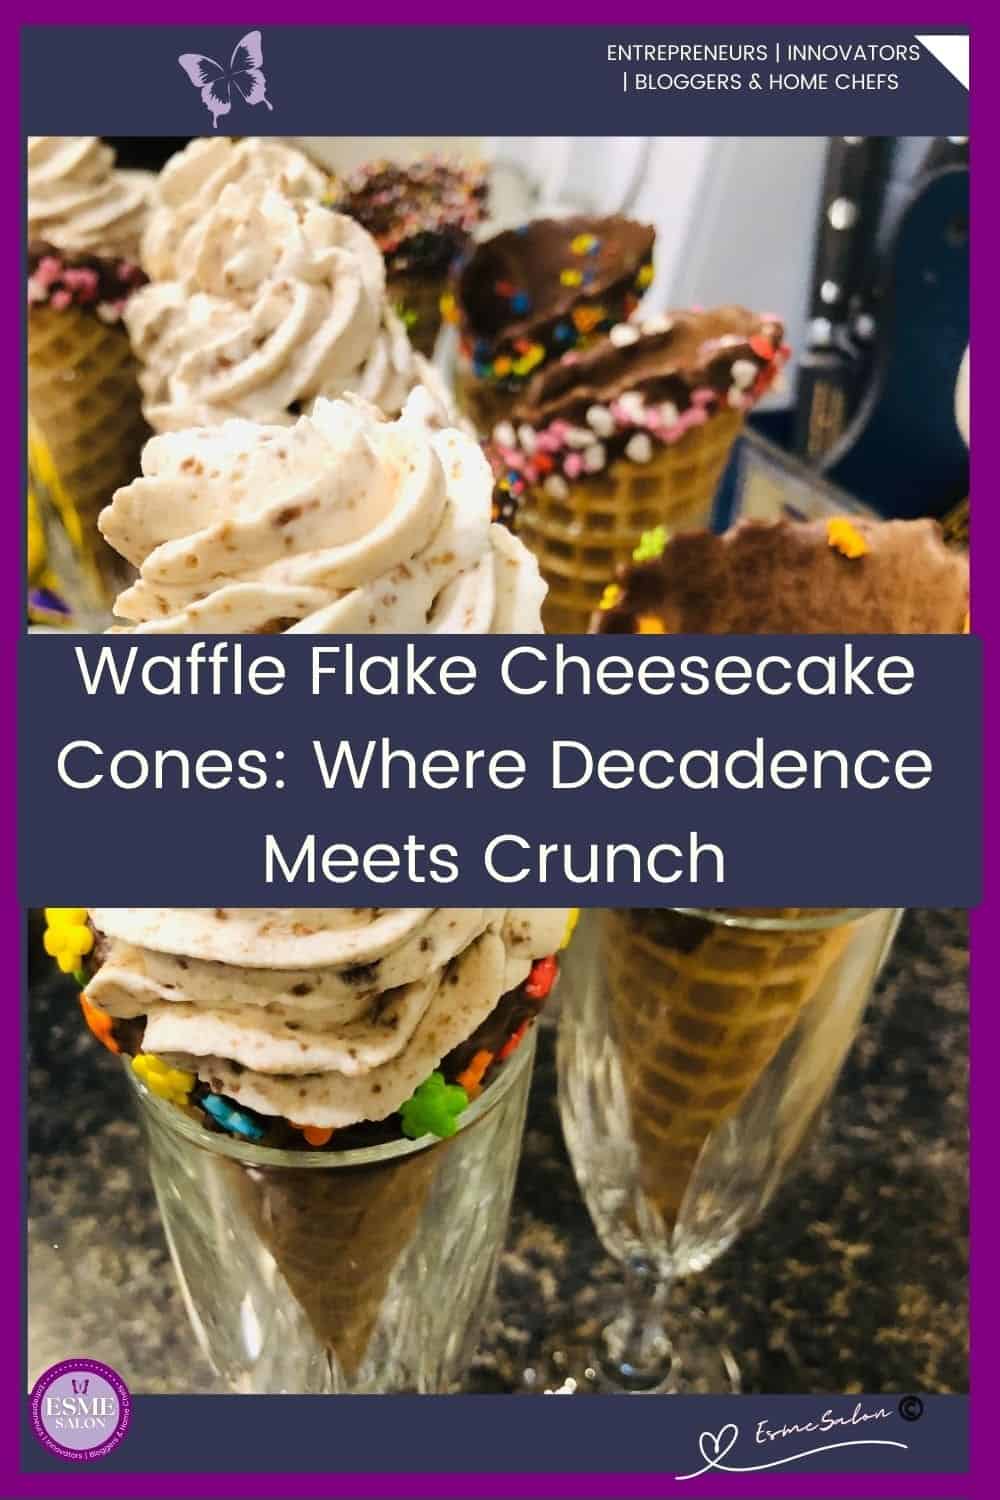 an image of a Waffle Cone covered with chocolate in the inside and filled with a cheesecake filling and Flake